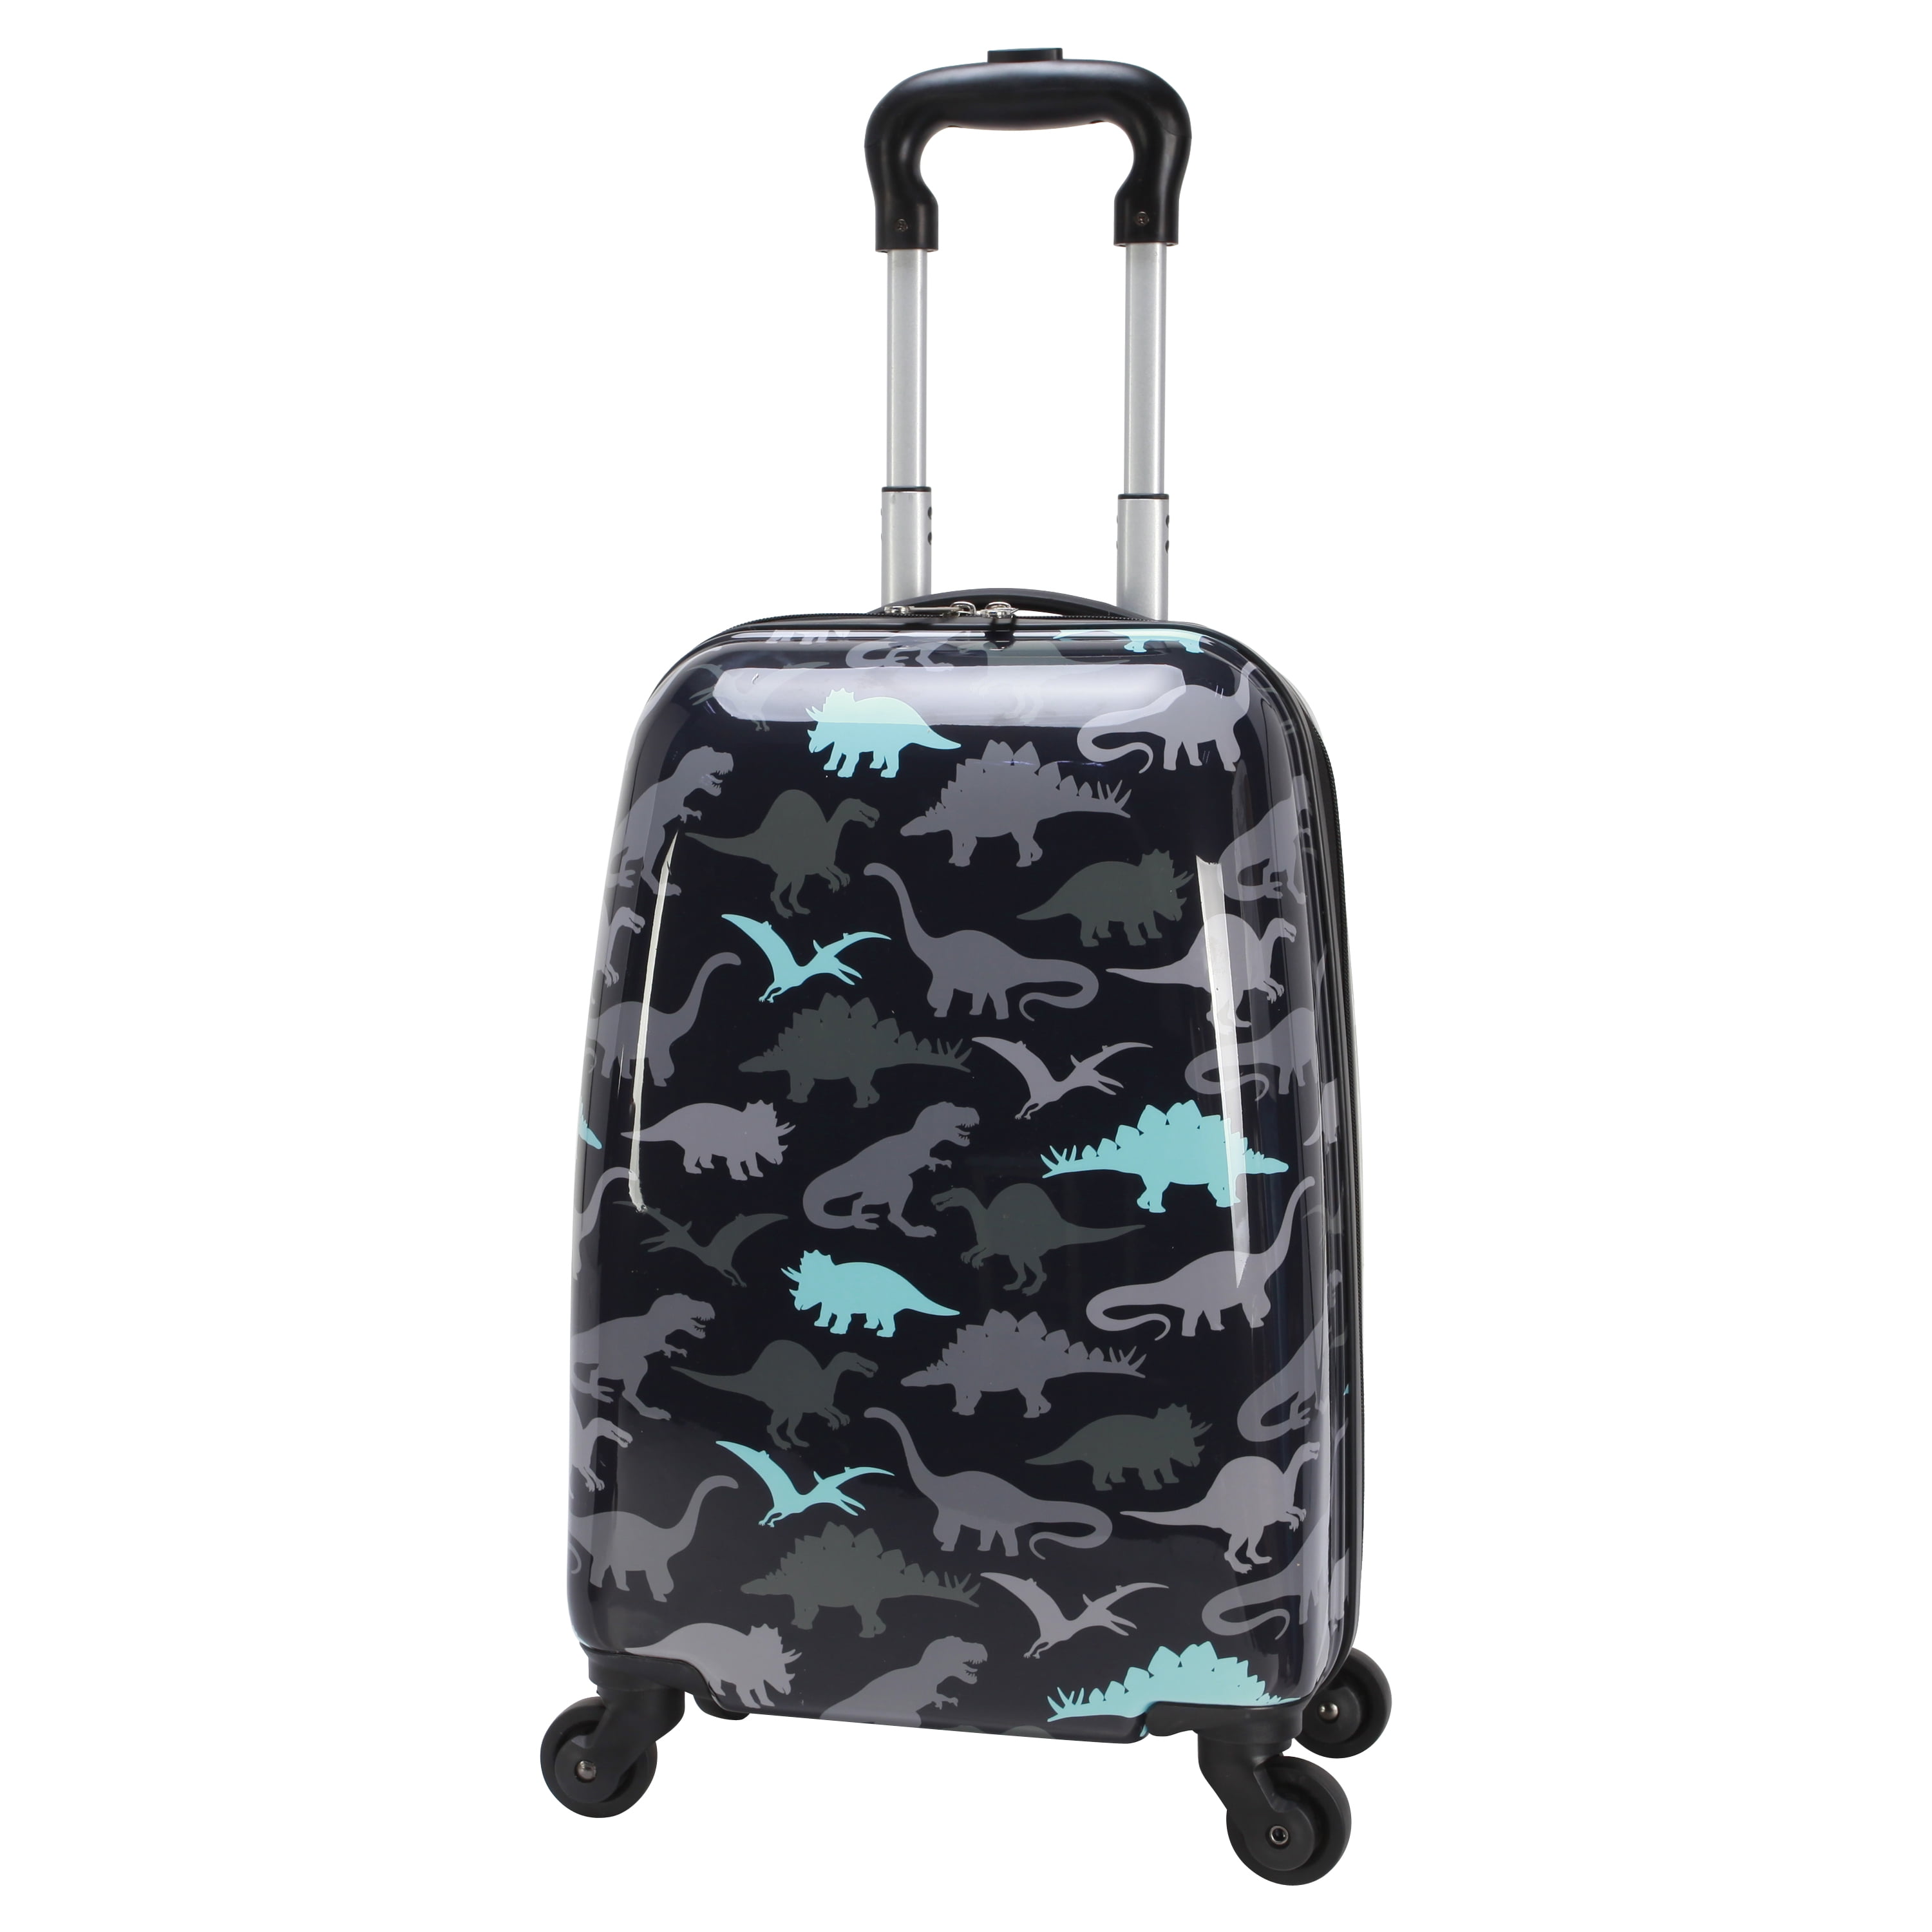 Suitcase Cover Space Dinosaurs Travel Luggage